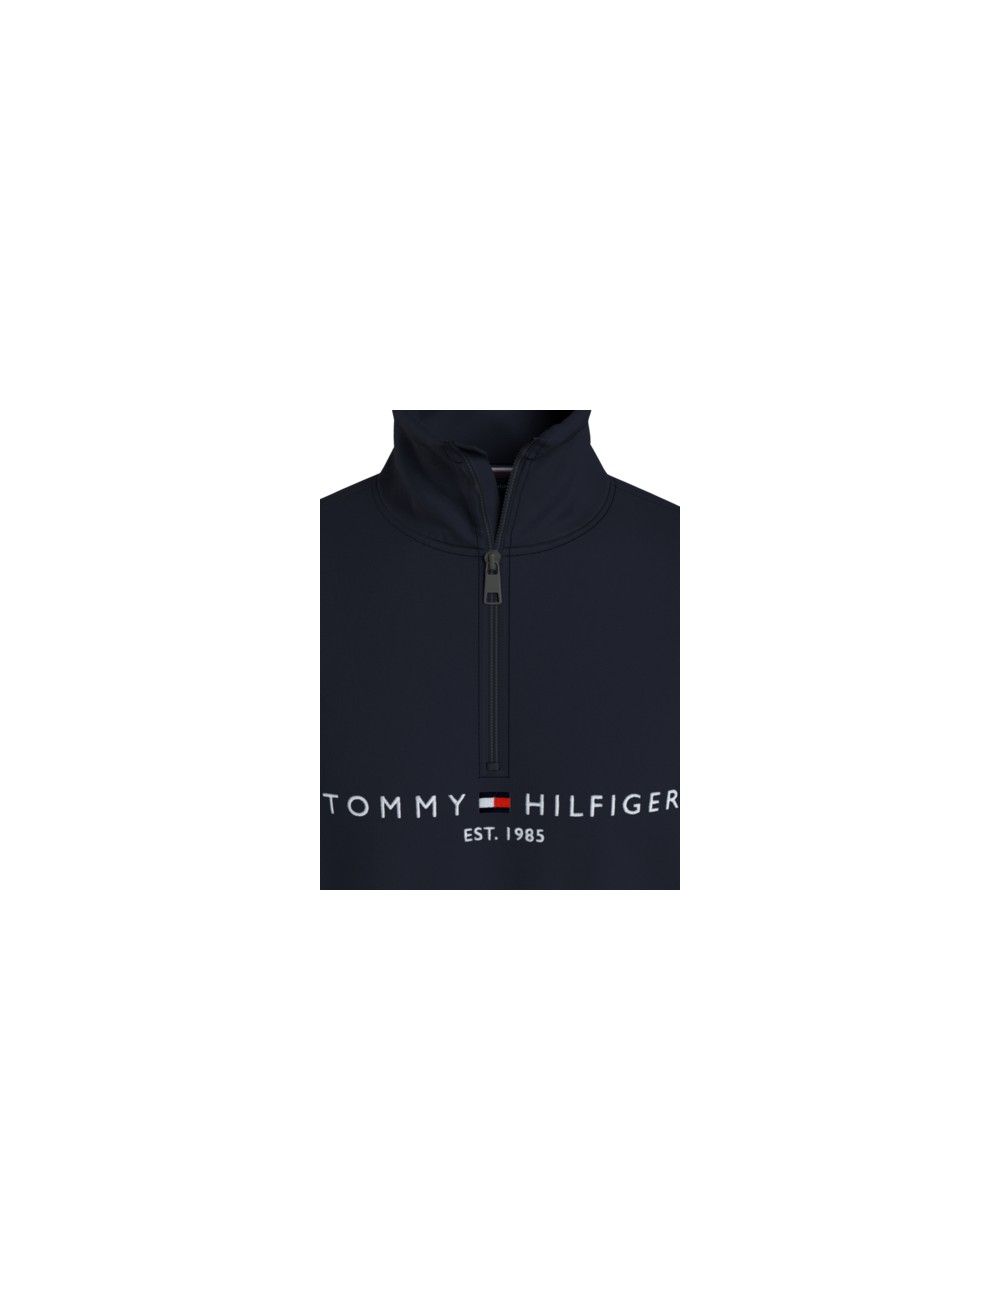 Tommy Hilfiger dukserica